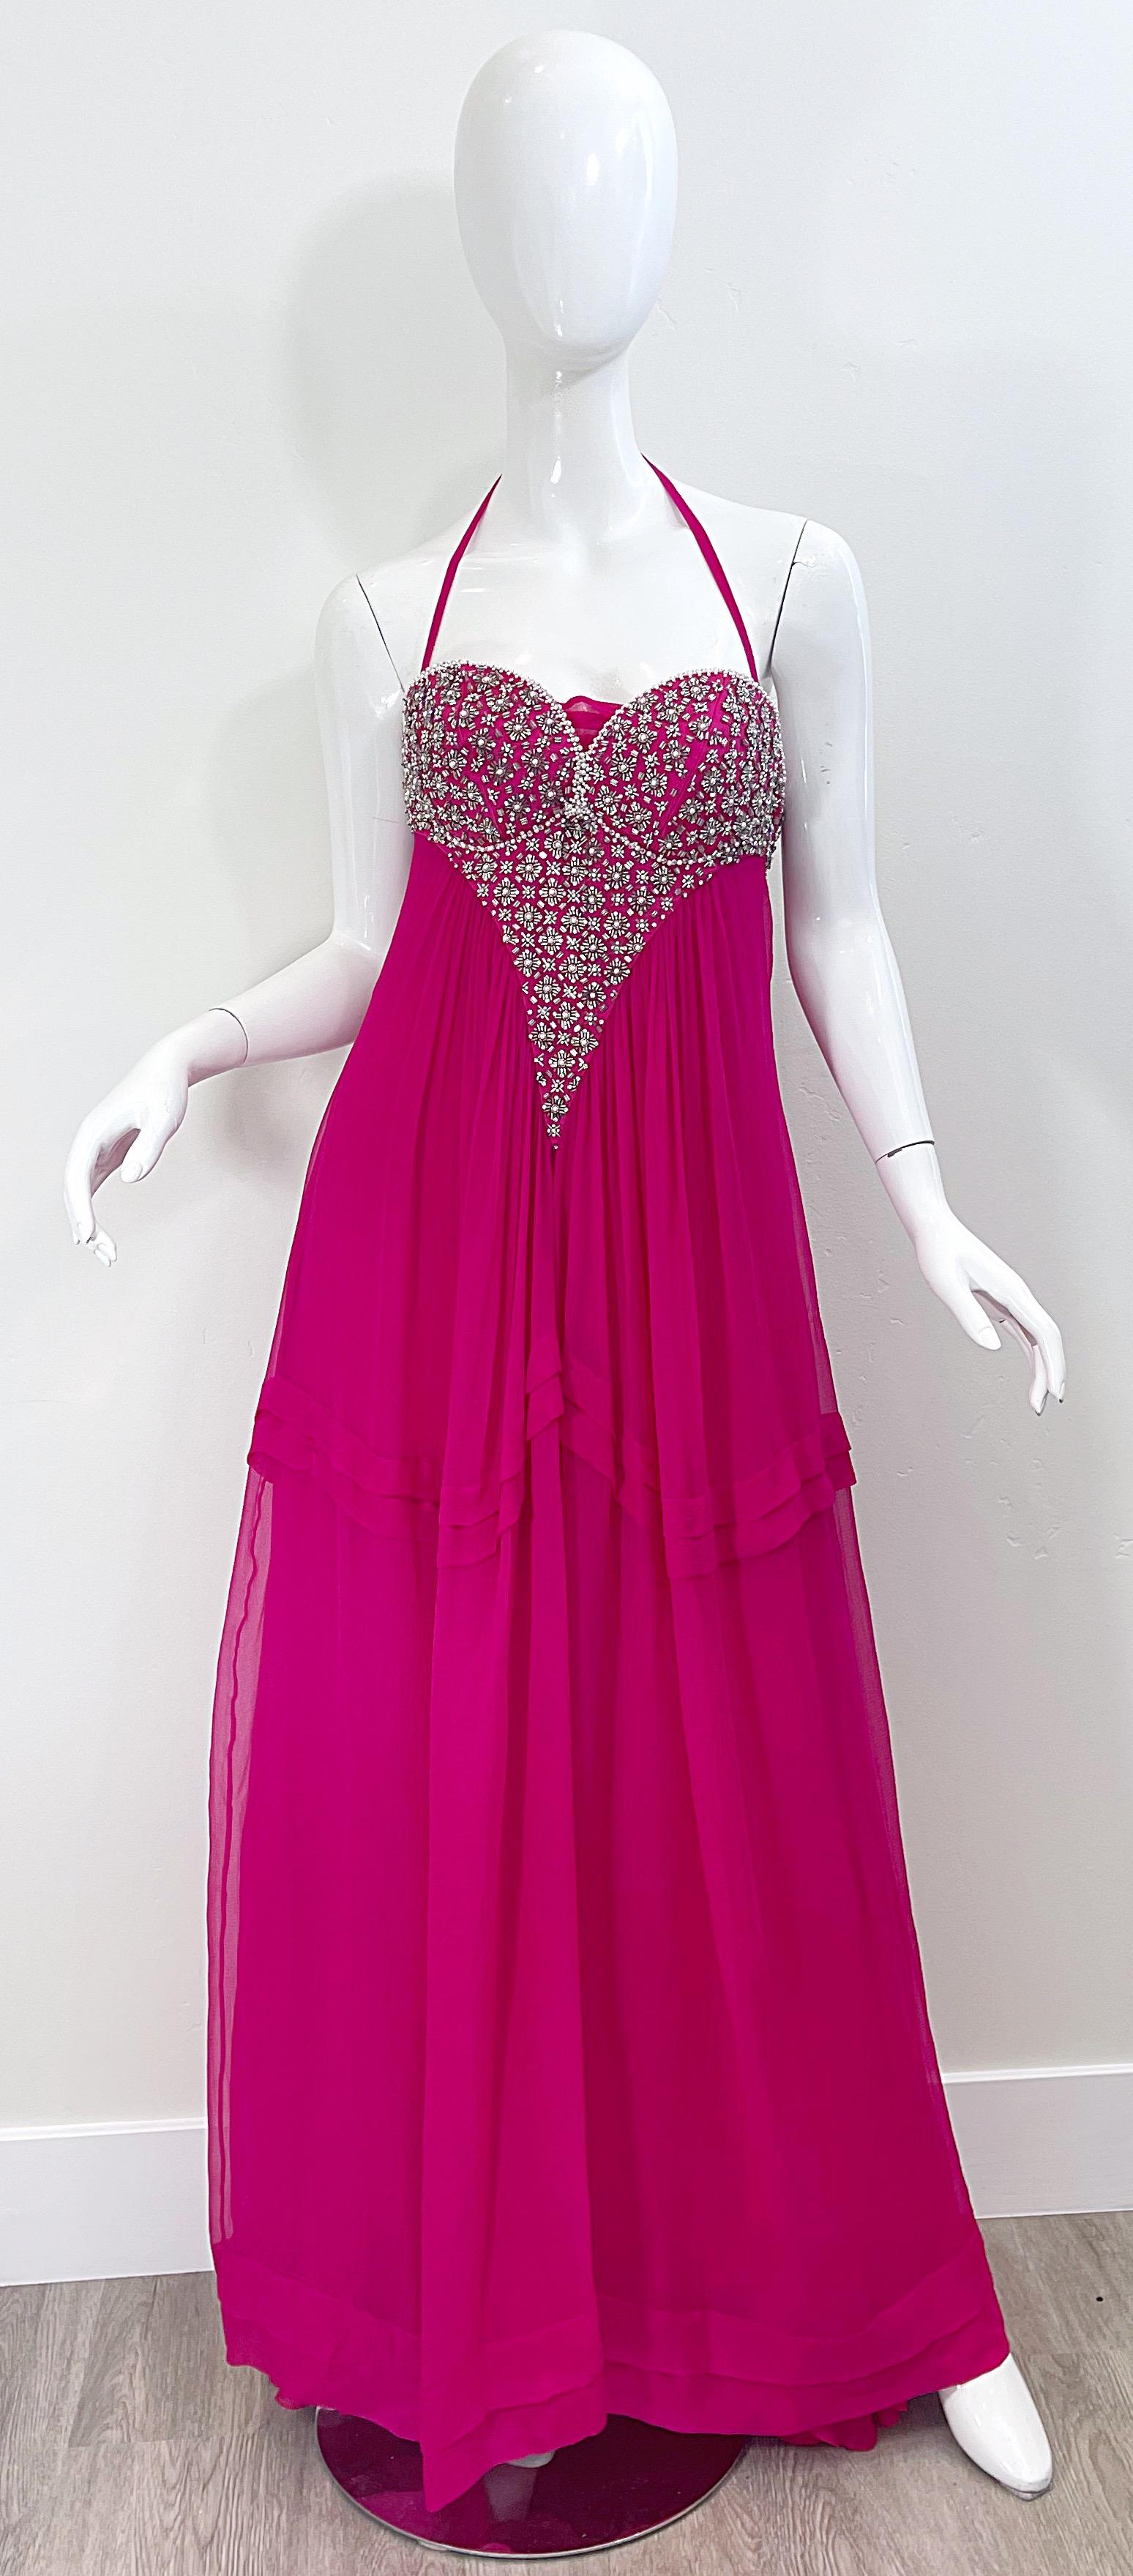 Beautiful vintage late 90s ROBERTO CAVALLI hot p[ink silk chiffon beaded / pearl / rhinestone encrusted halter gown ! This flattering evening dress features thousands of hand-sewn sequins, beads, rhinestones and pearls throughout the front and back